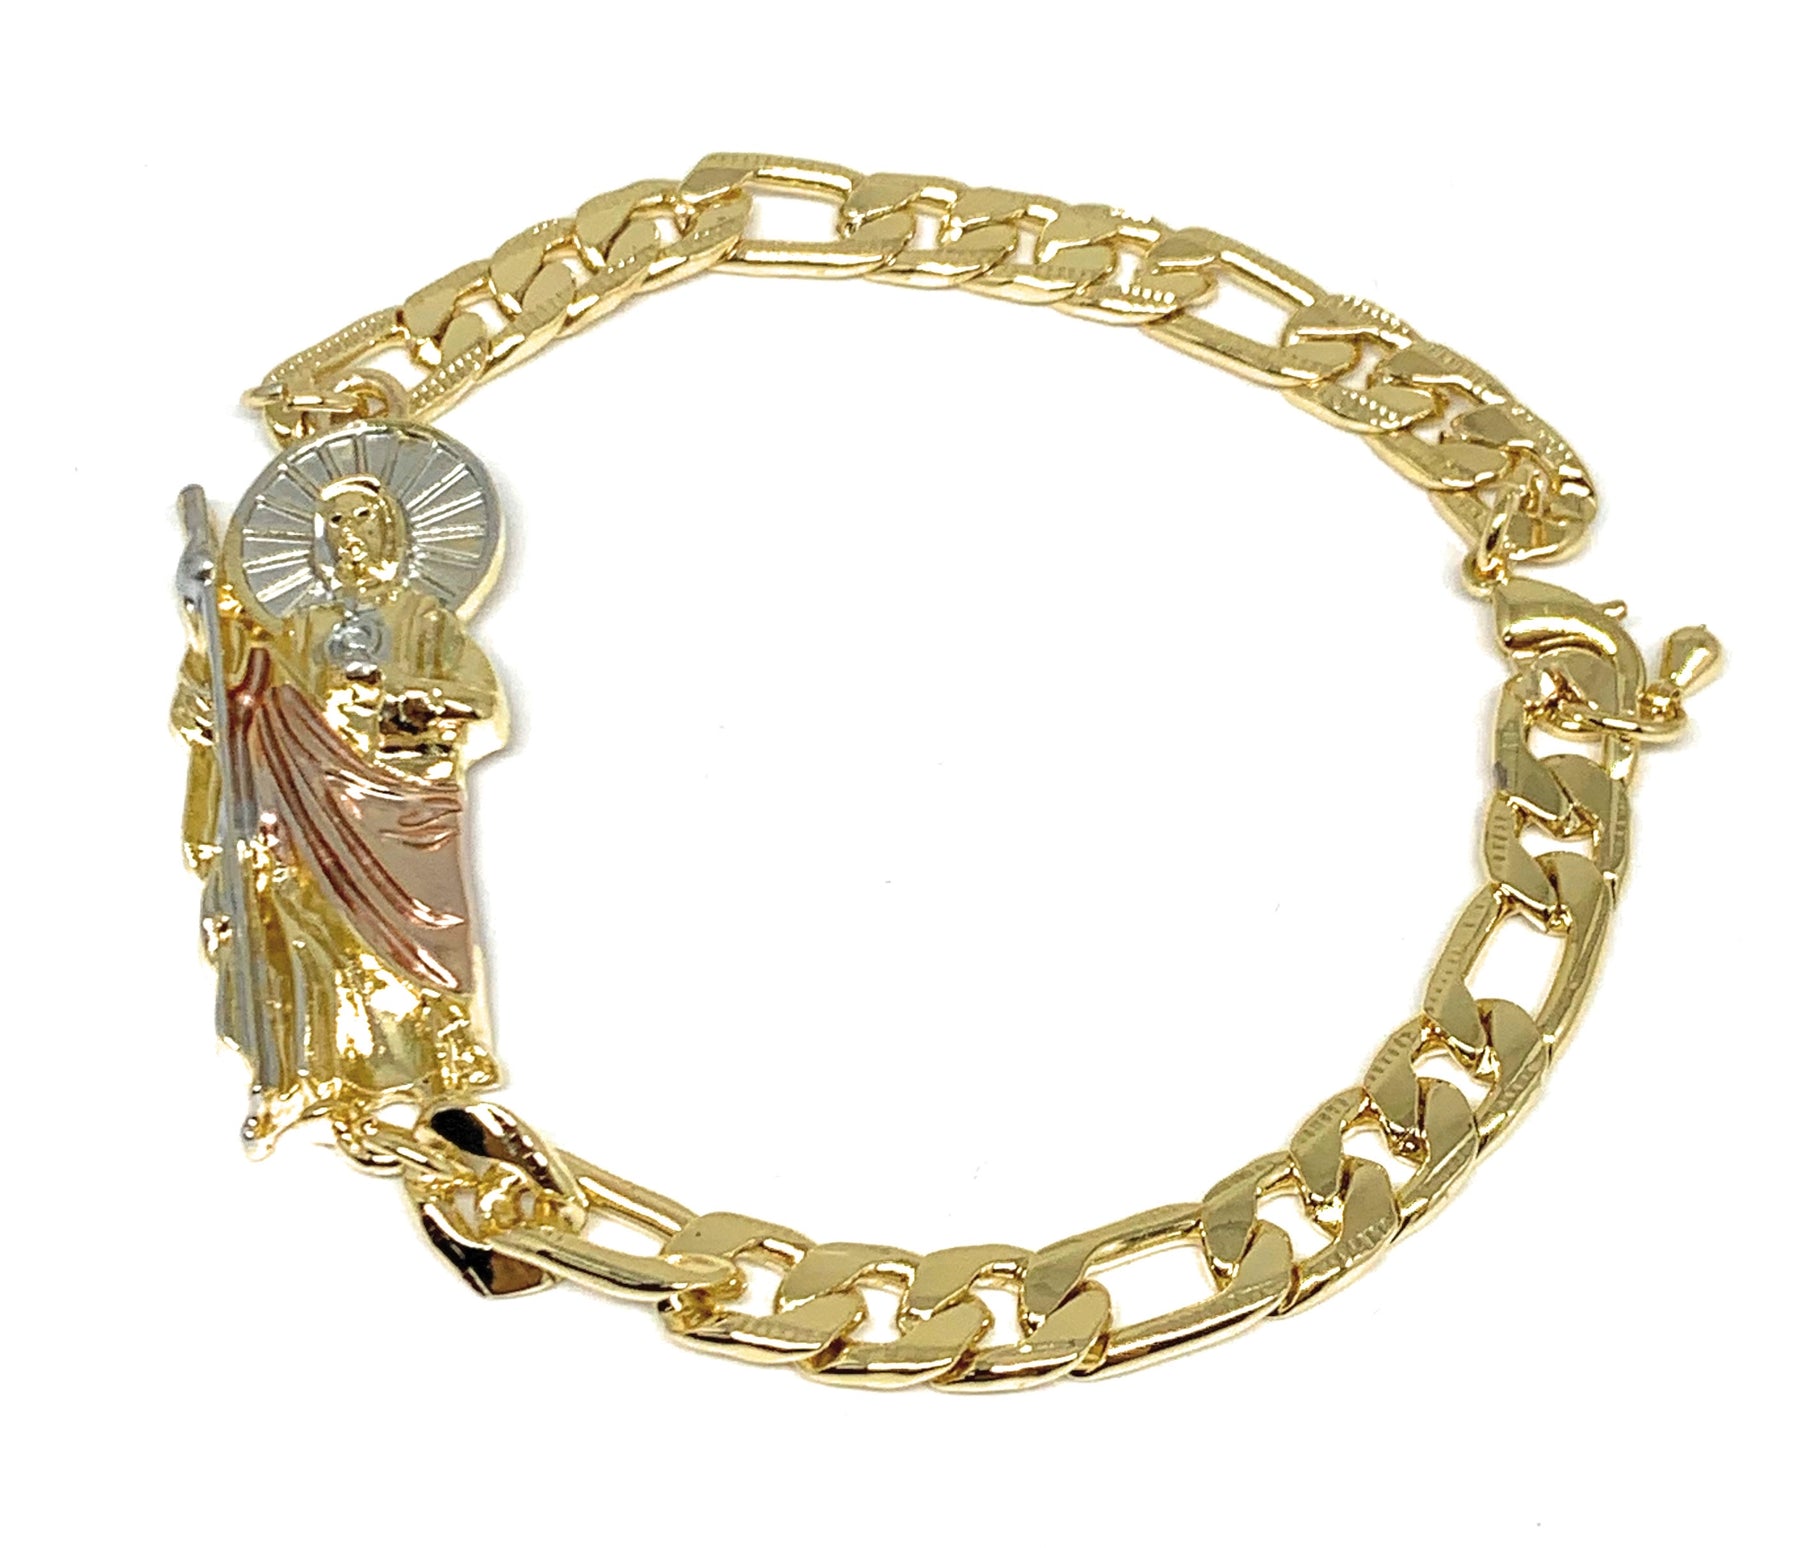 Cute Virgencita Bracelet Charms Gold Plated Mexican Pulsera Virgin Mary San  Judas Tadeo Accessories for Women DIY Jewelry Making